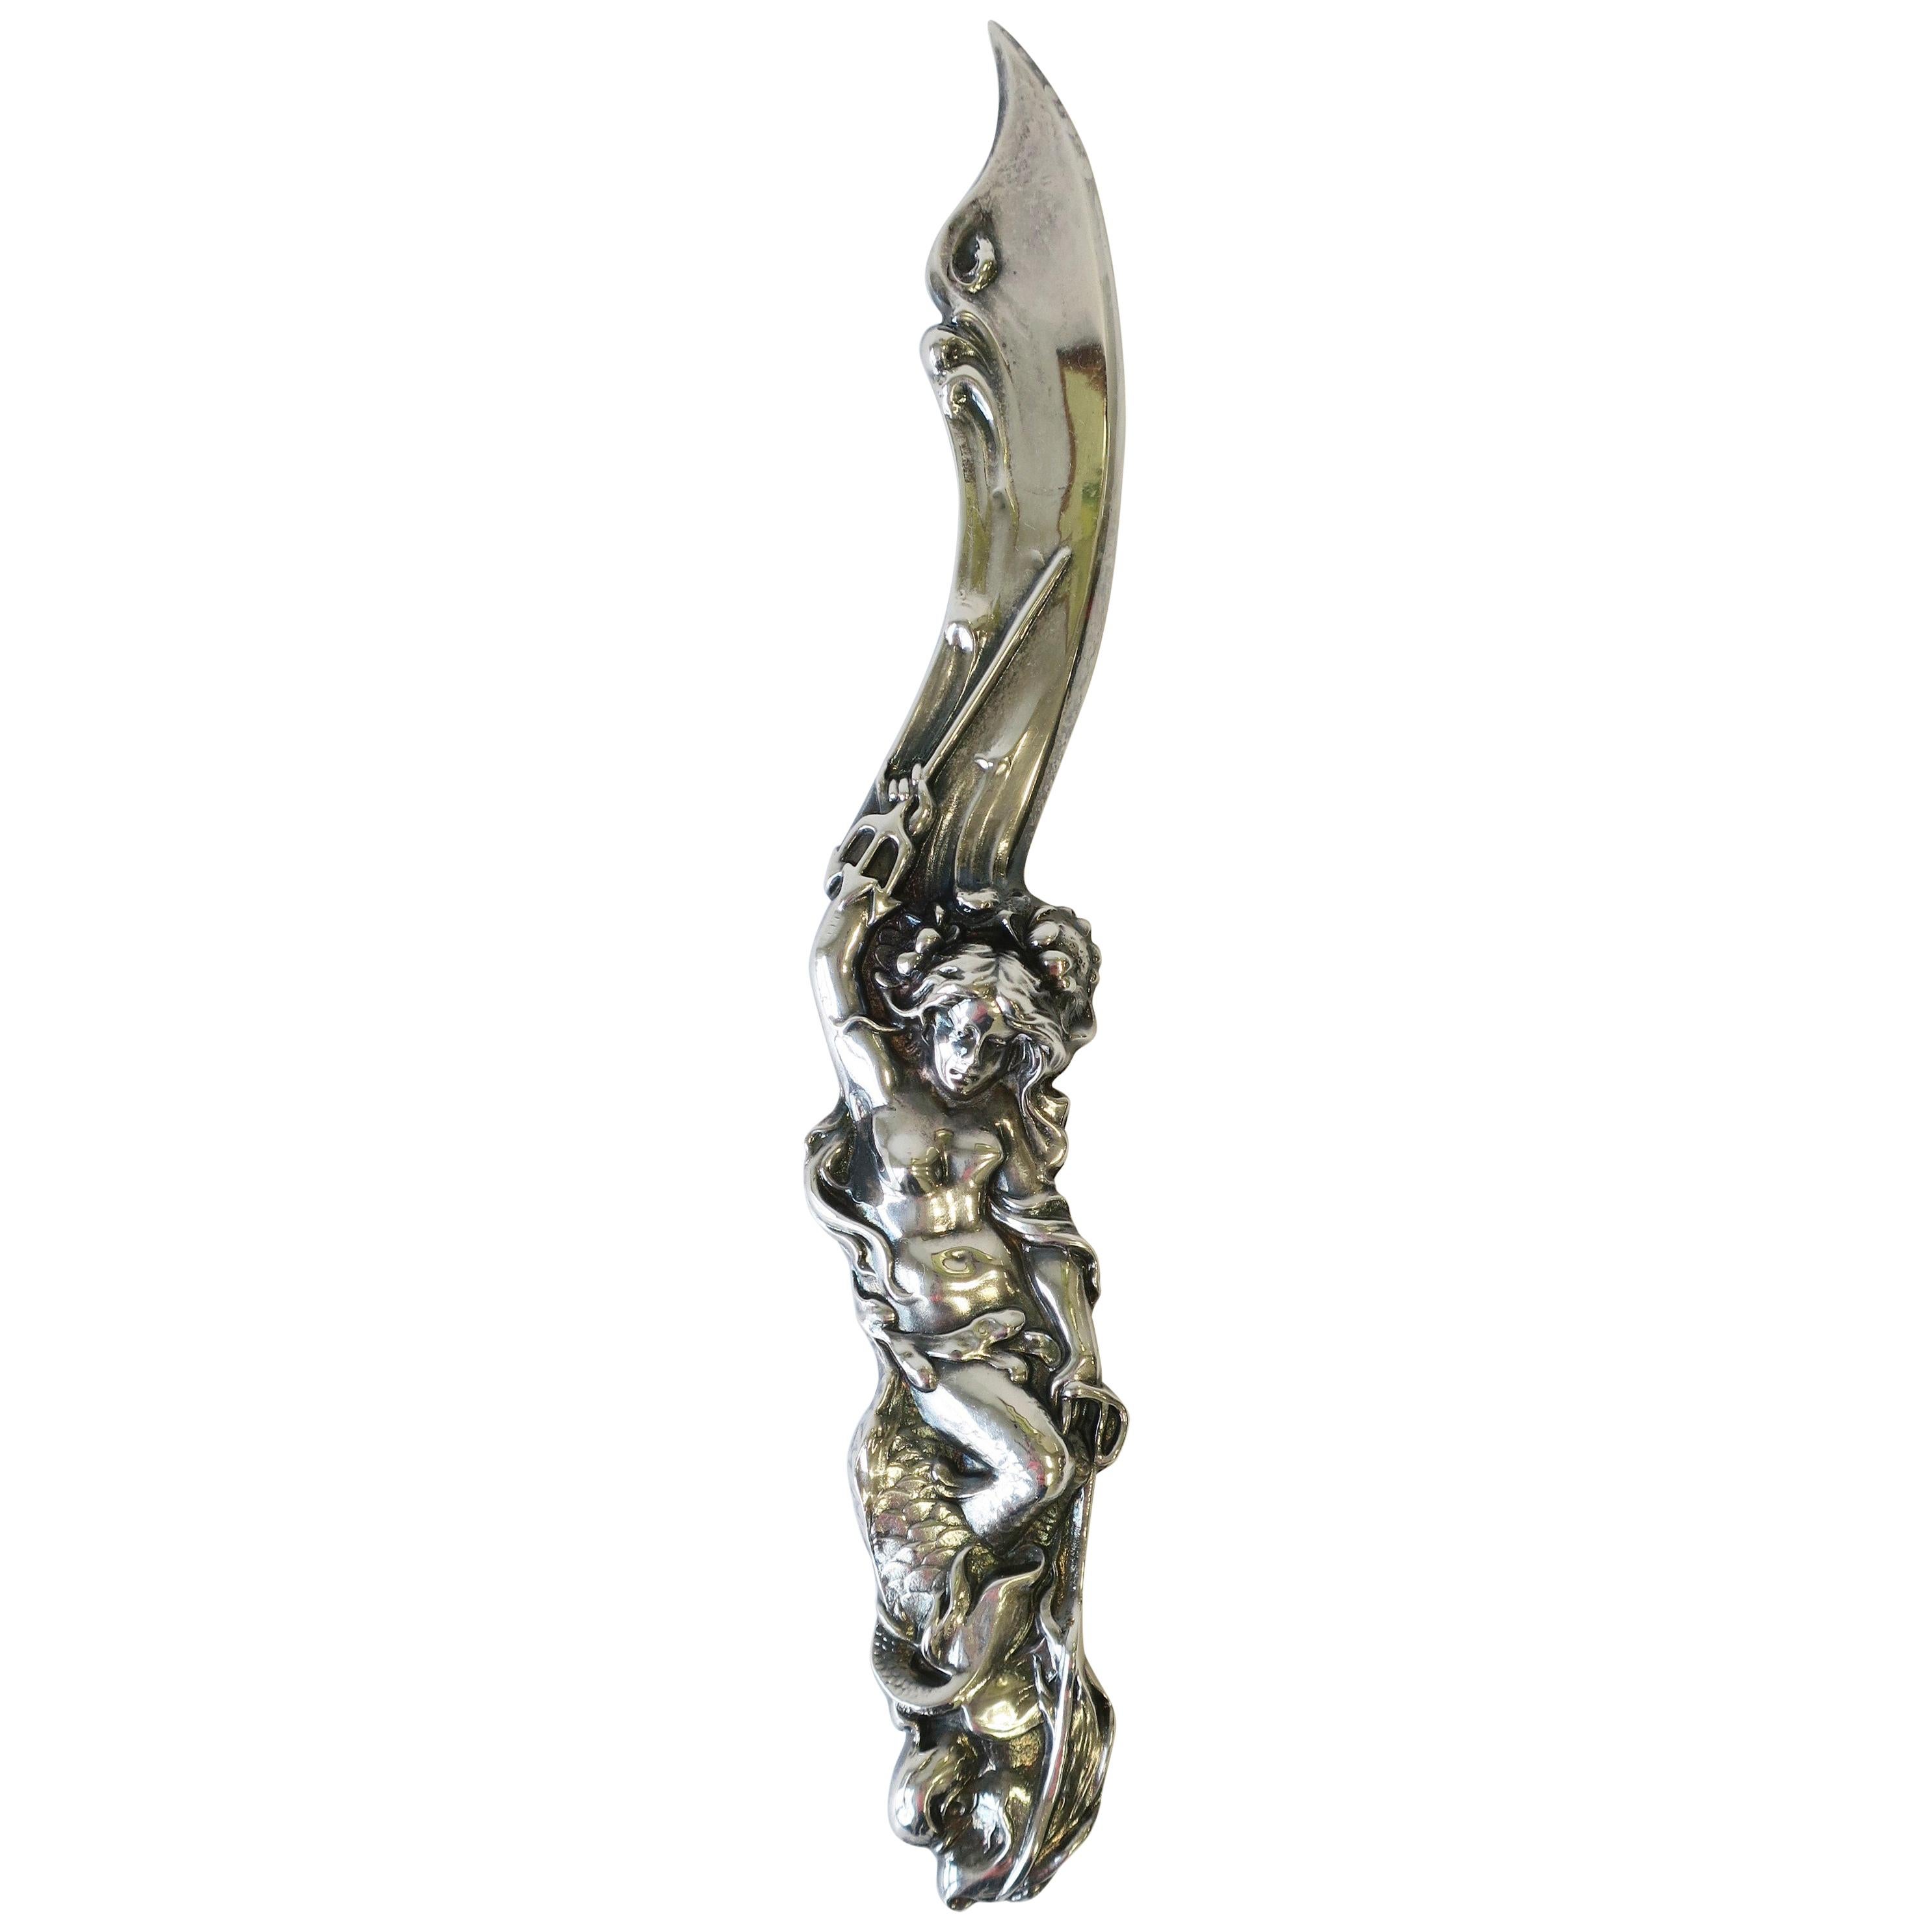 Art Nouveau Letter Opener with Mermaid, 1990s